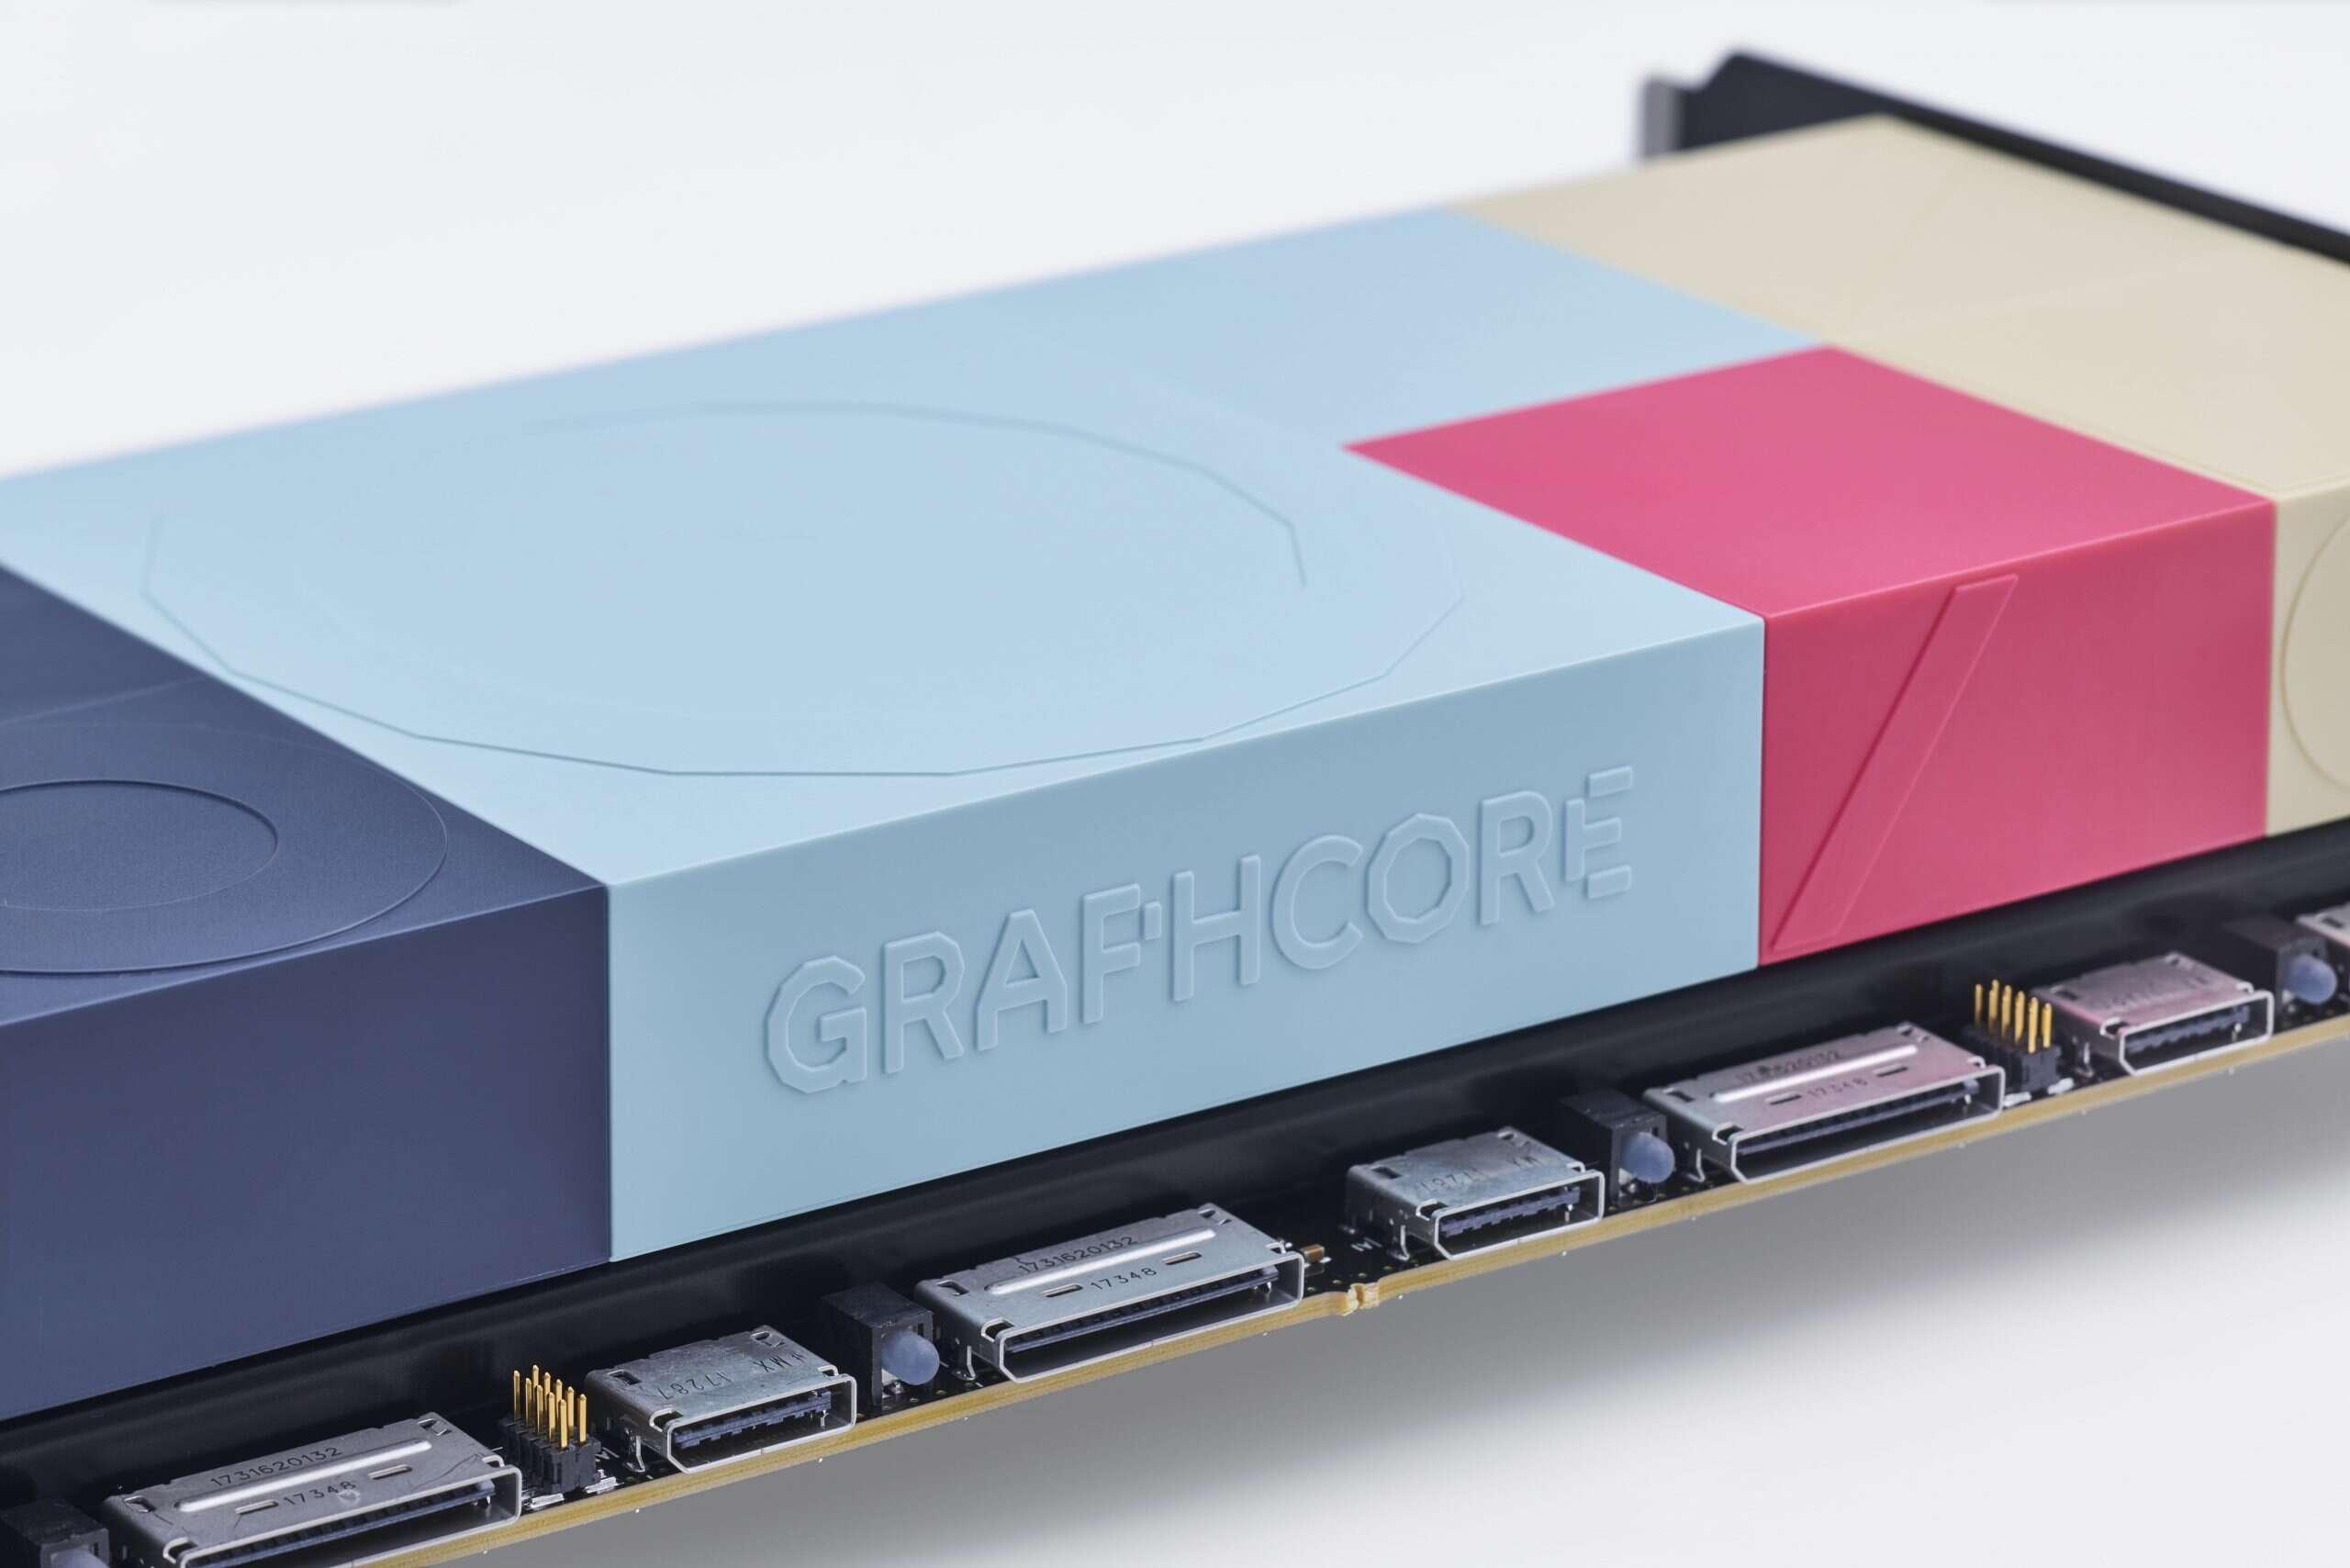 Graphcore CEO says Europe must build digital sovereignty as AI chipmaker targets NVIDIA